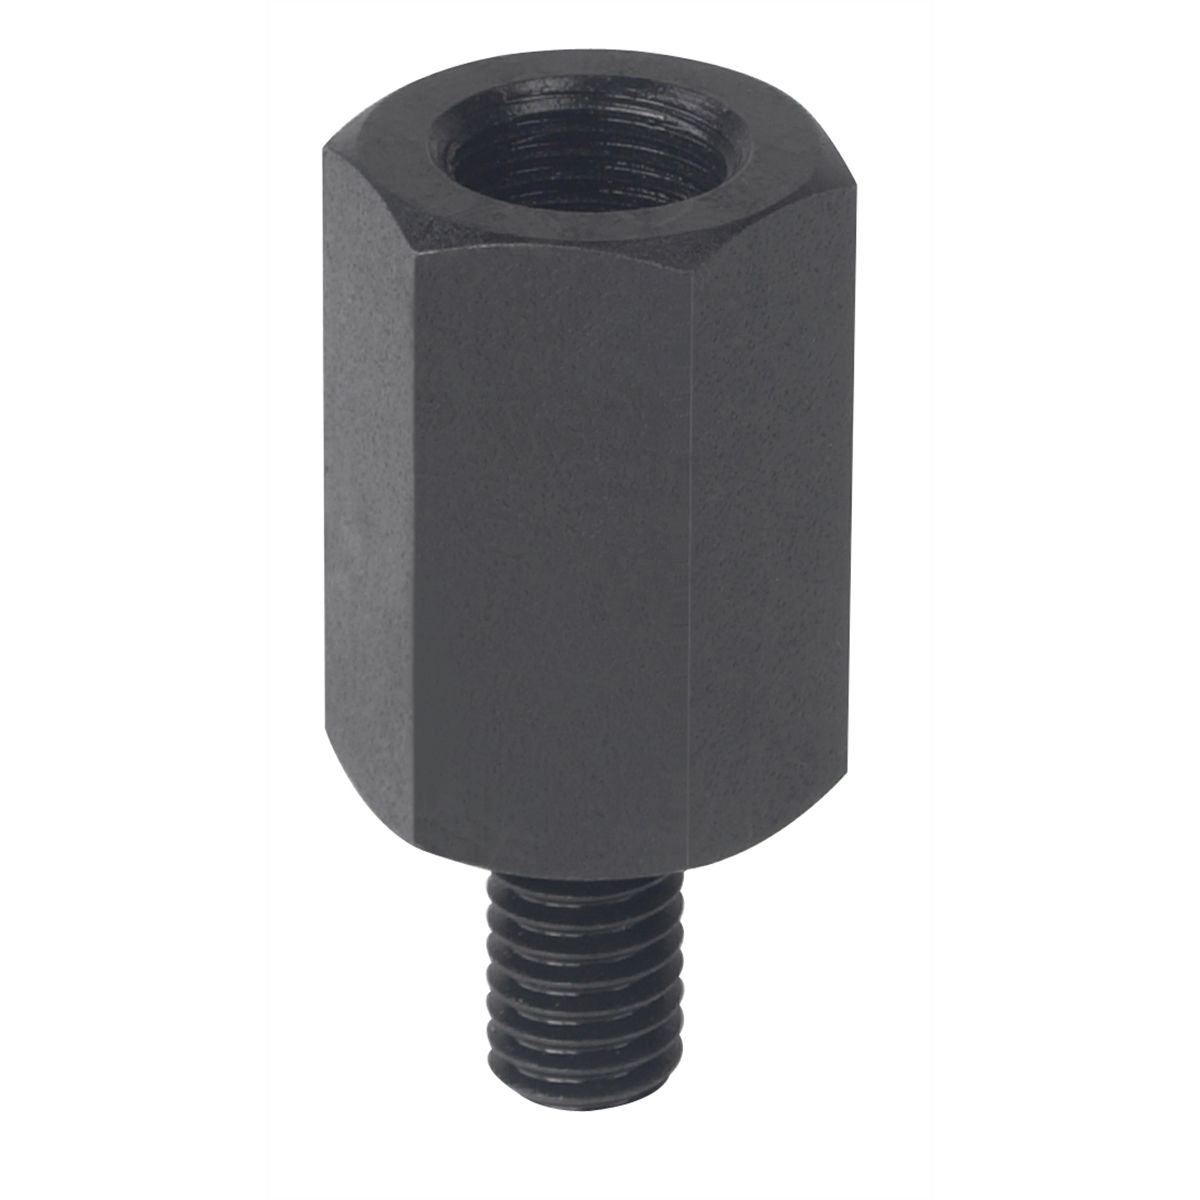 Puller Adapter 5/8-18 Female To 1/2-20 Male